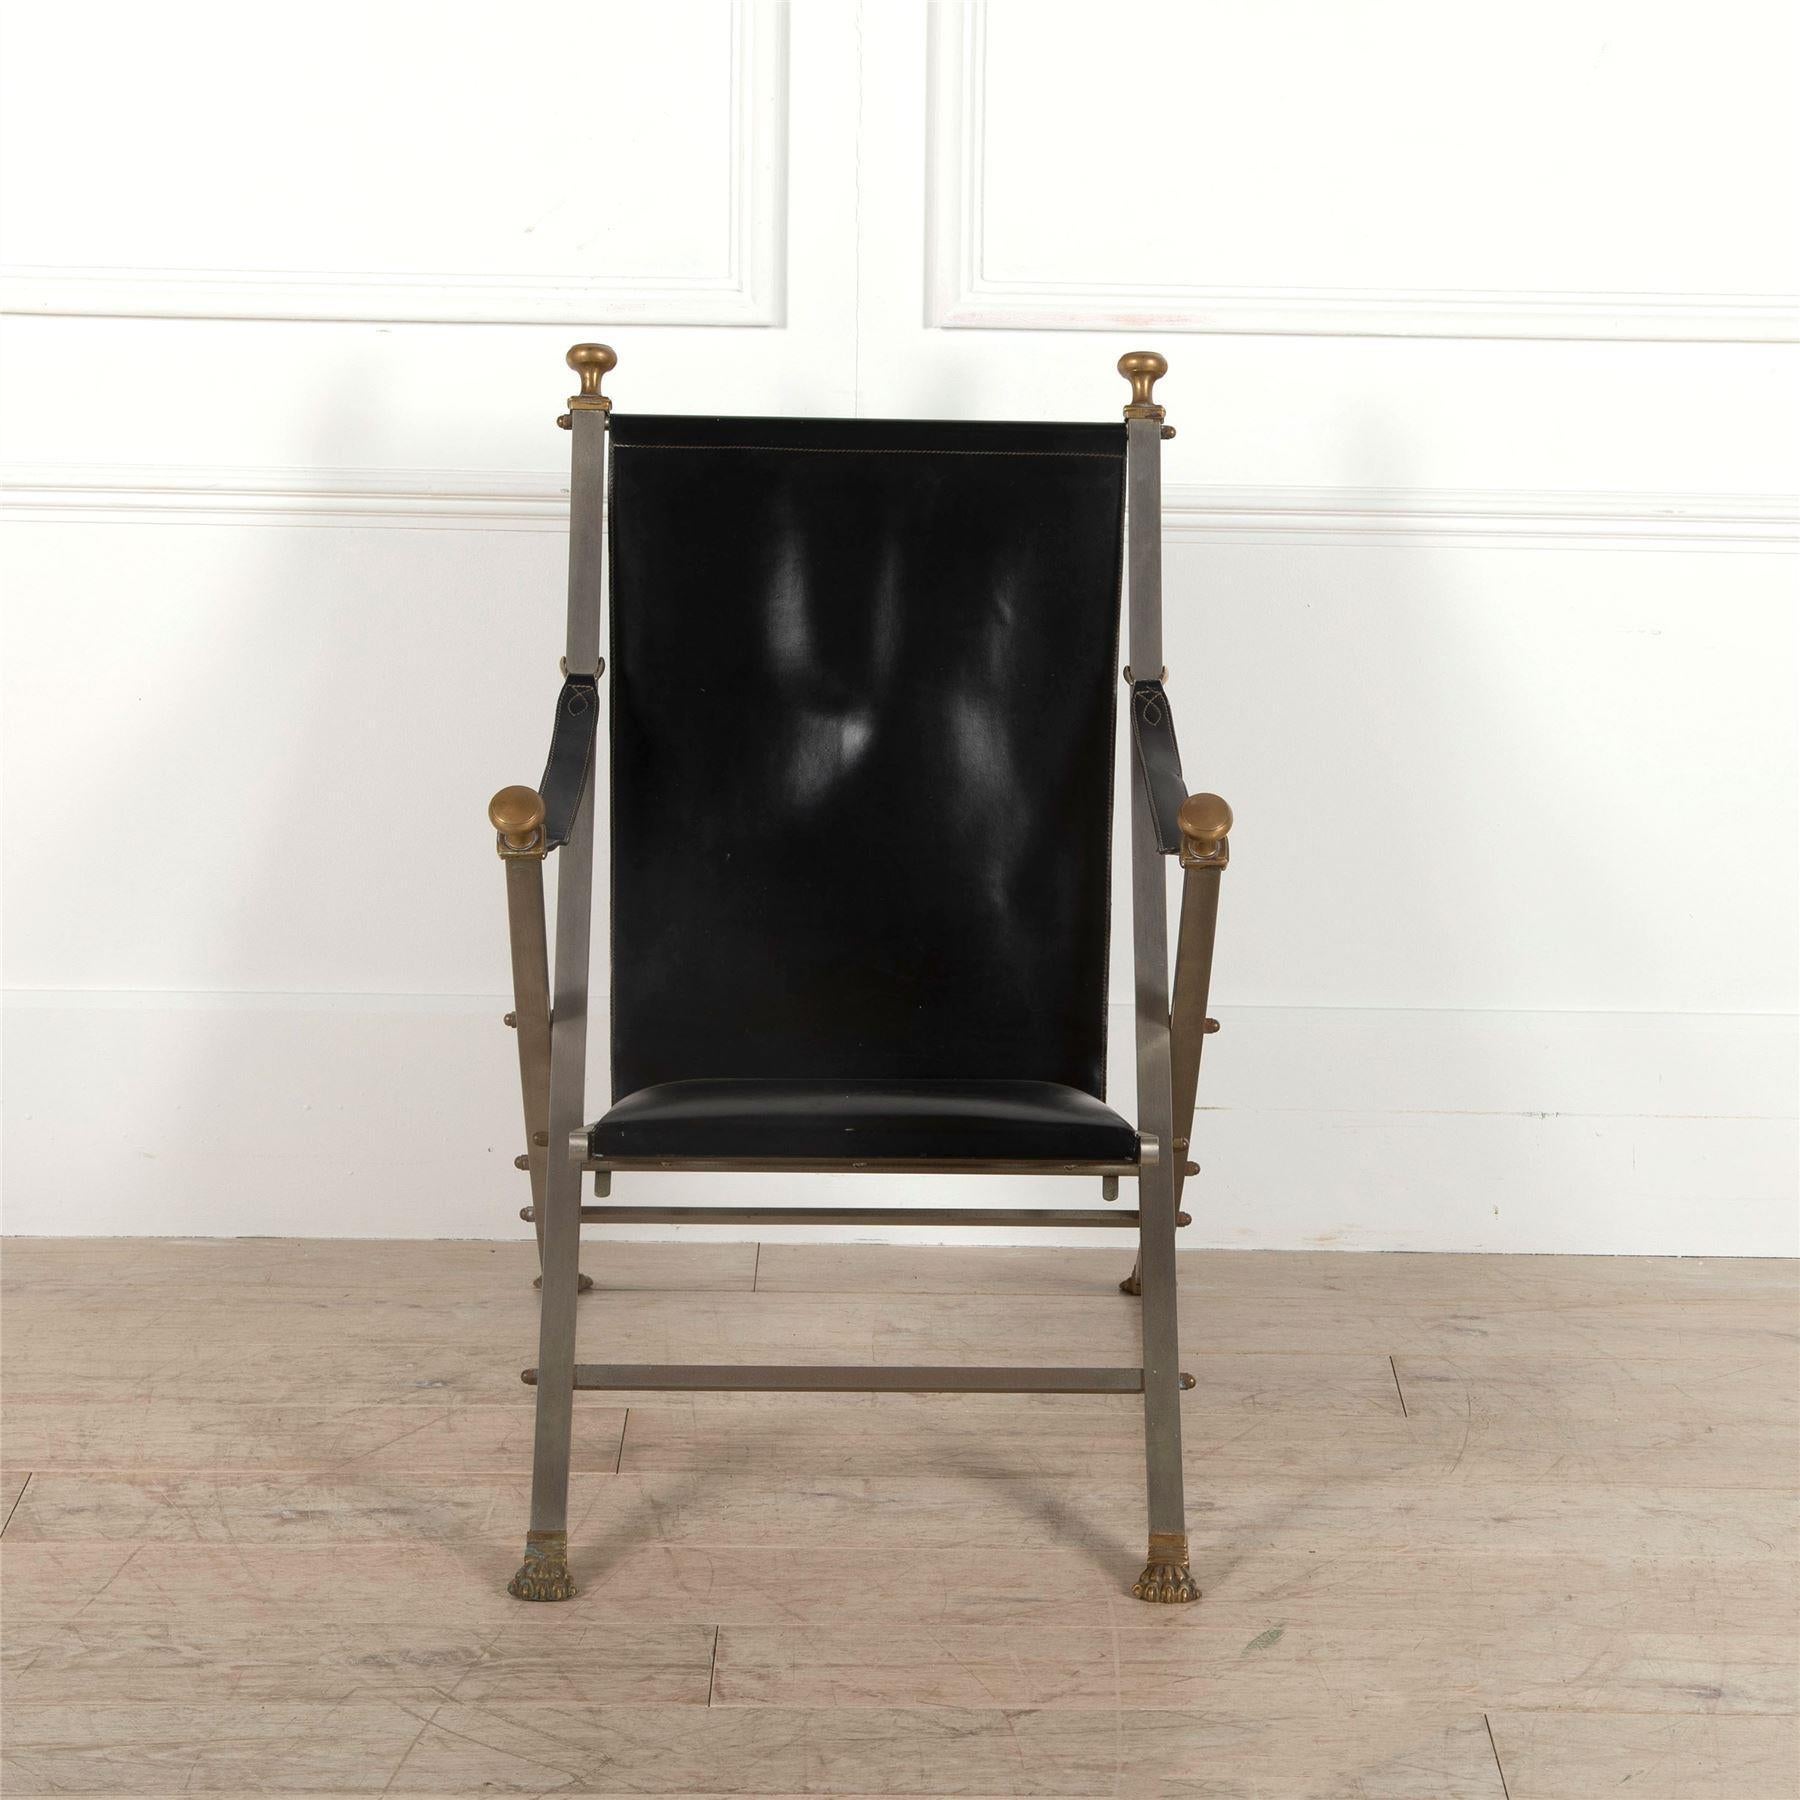 A campaign style chair by Maison Jansen.